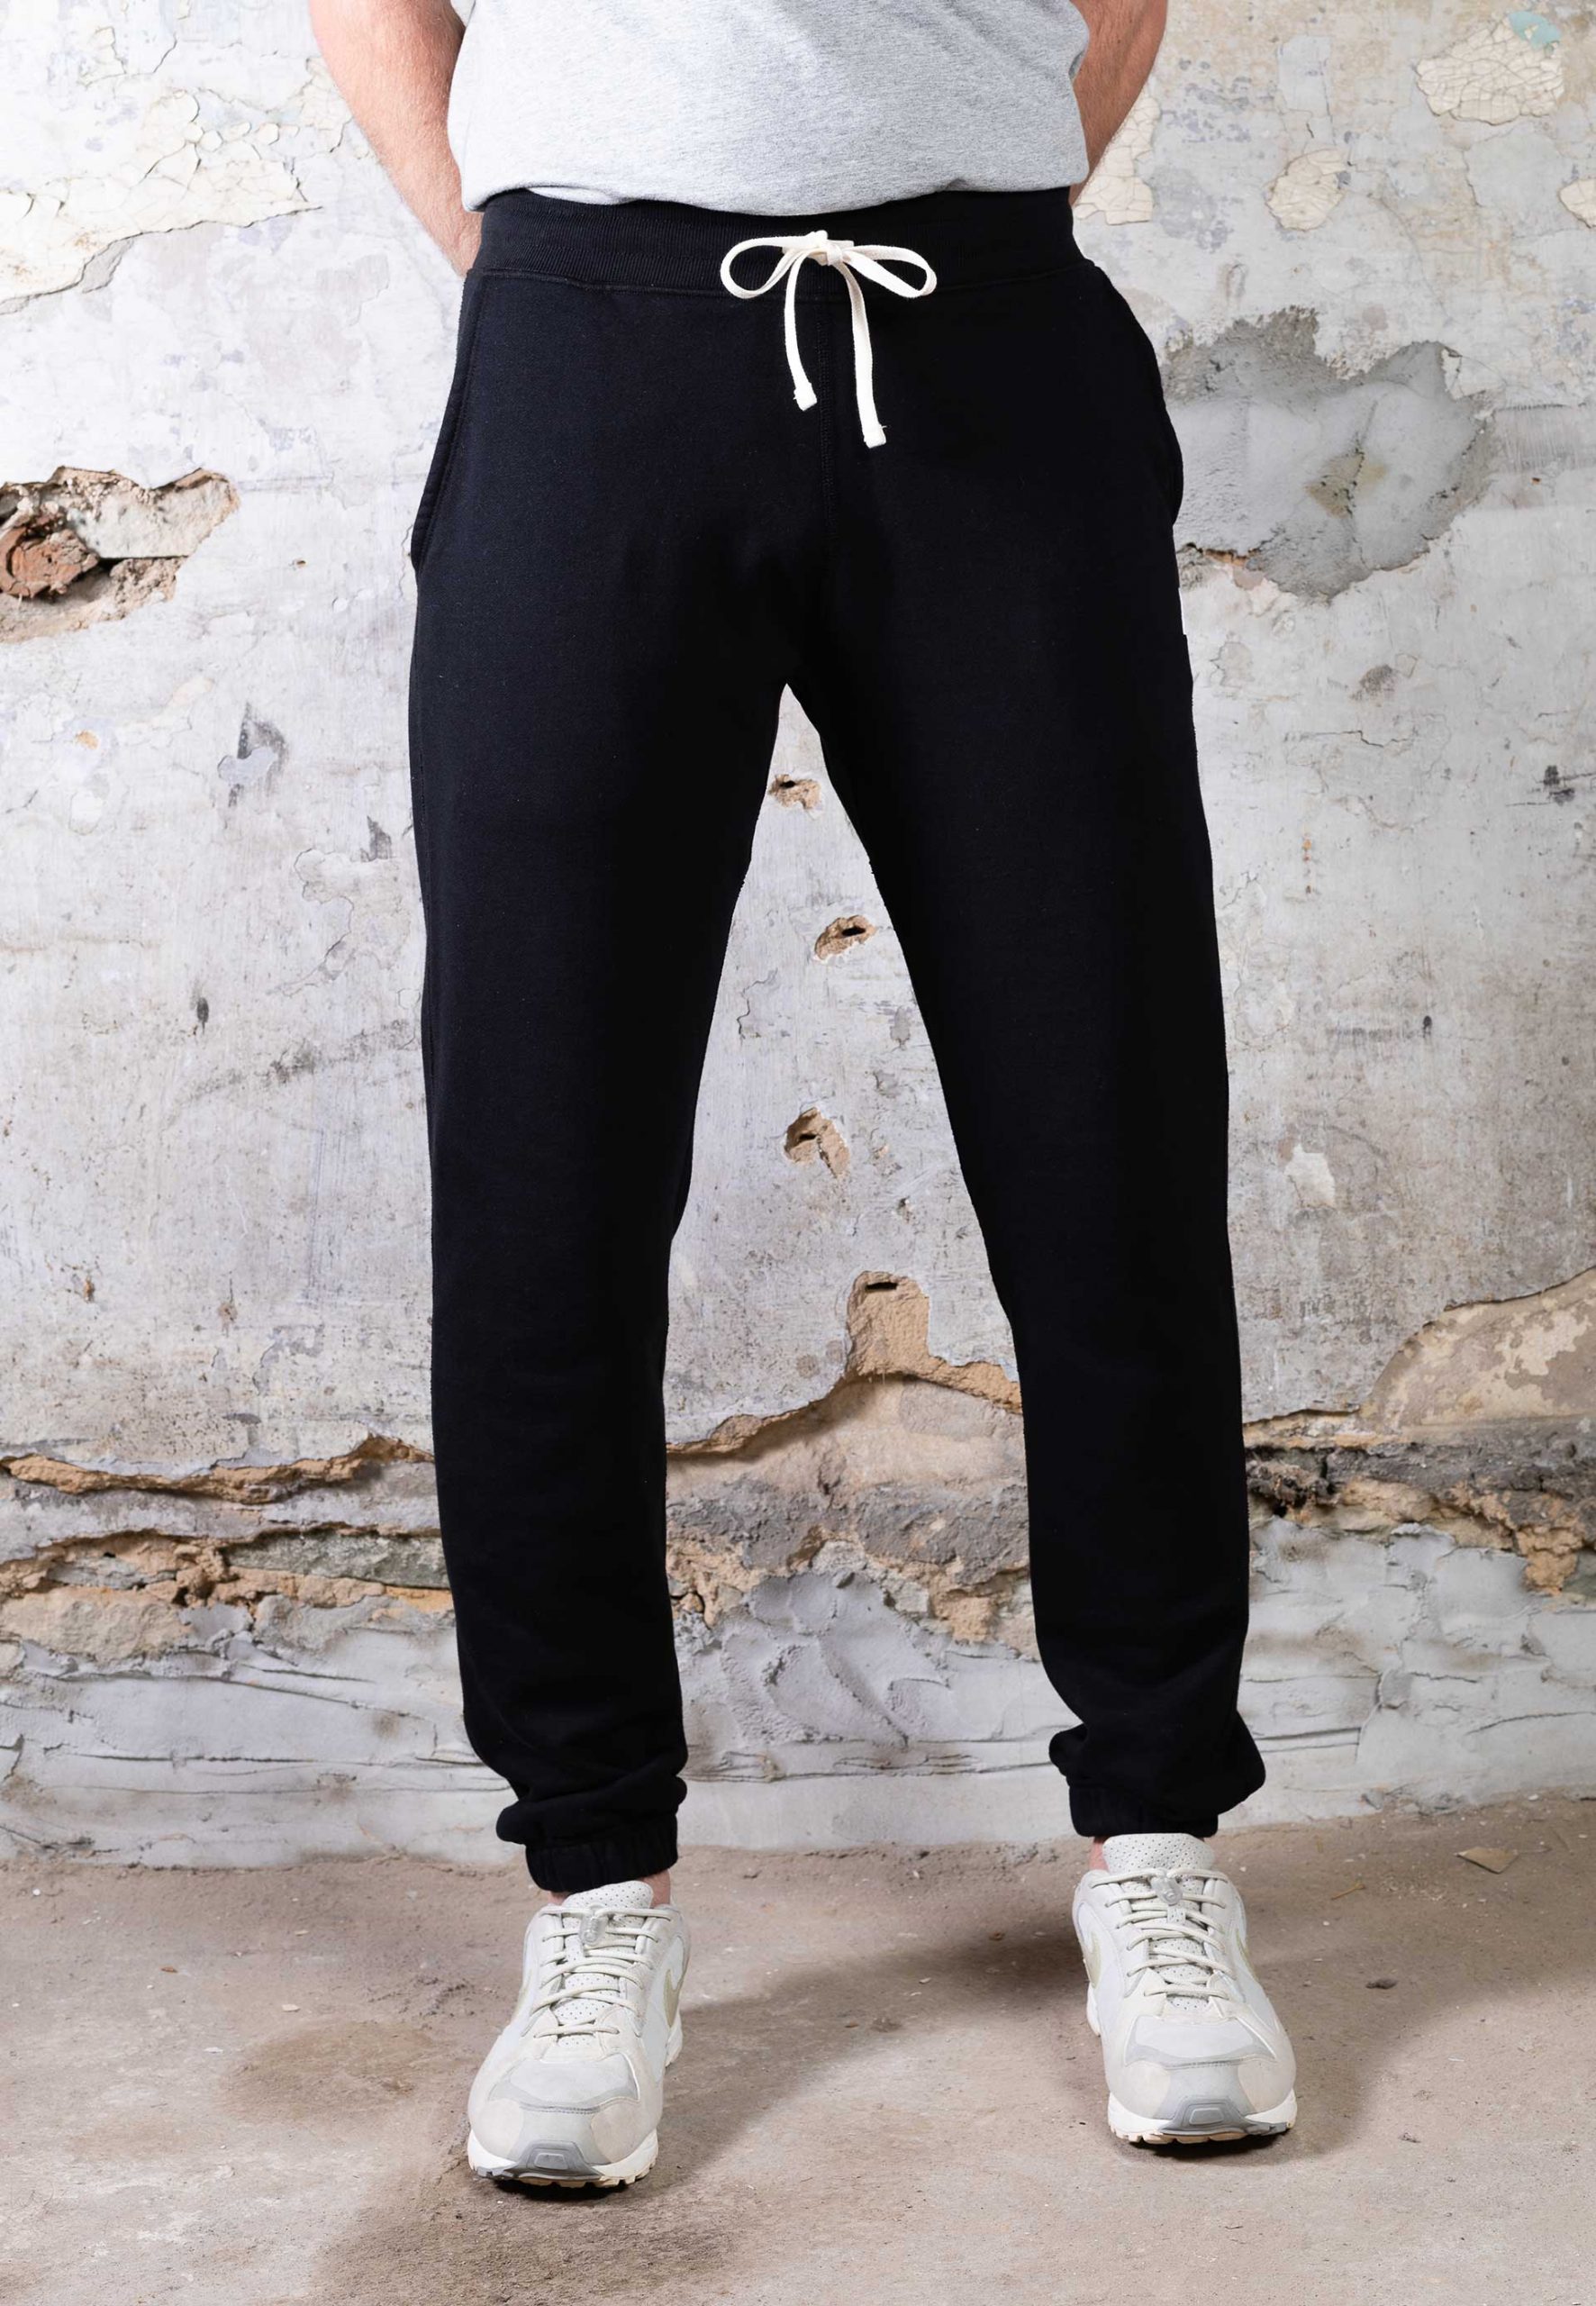 https://franklinandmercer.com/wp-content/uploads/2020/09/Reigning-Champ-Classic-Sweatpant-Onbody-scaled.jpg